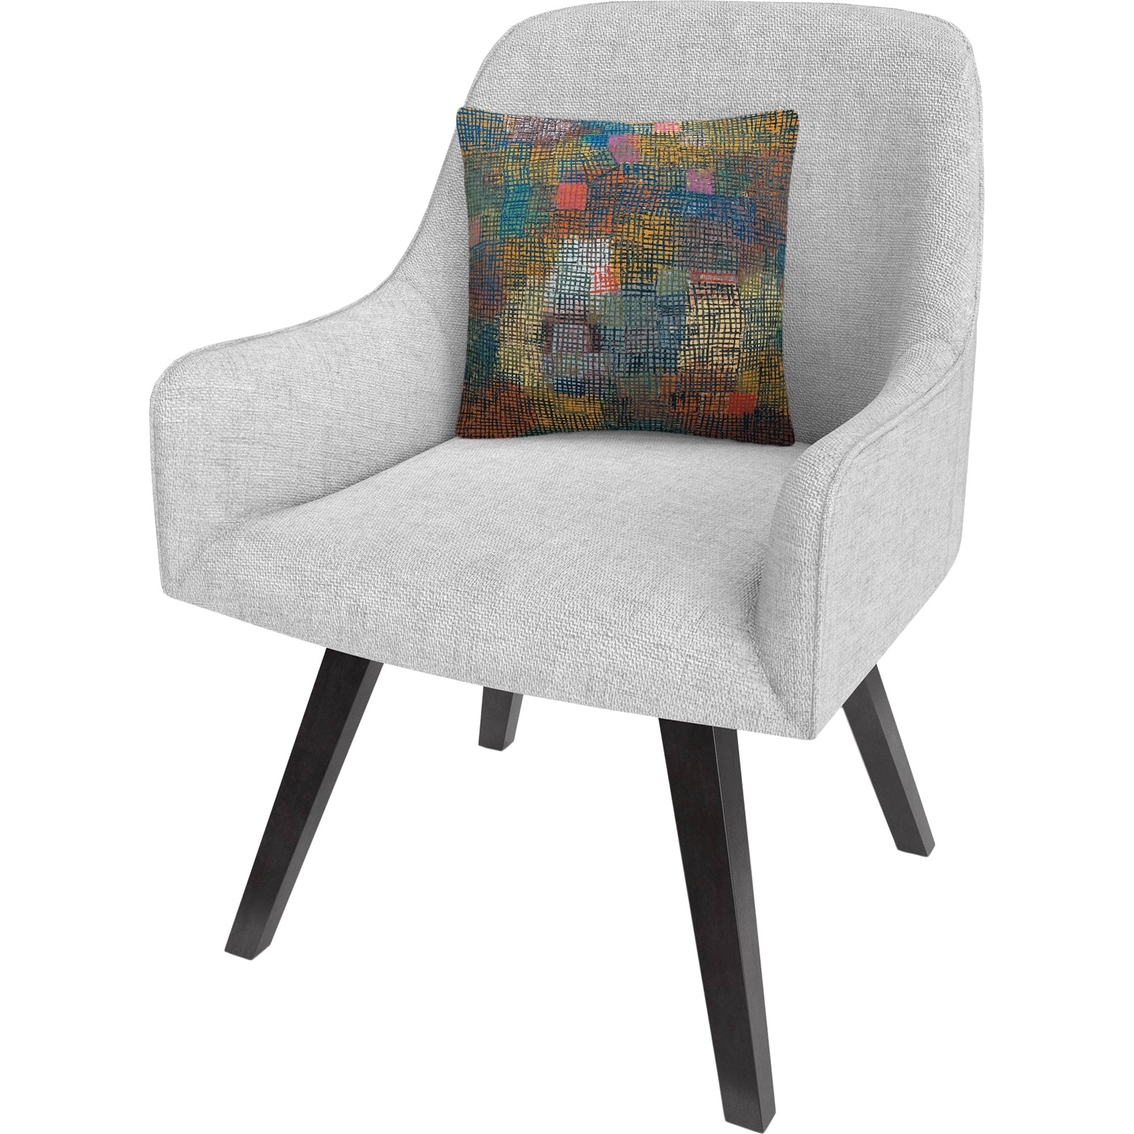 Trademark Fine Art Paul Klee Colors from a Distance Decorative Throw Pillow - Image 2 of 3